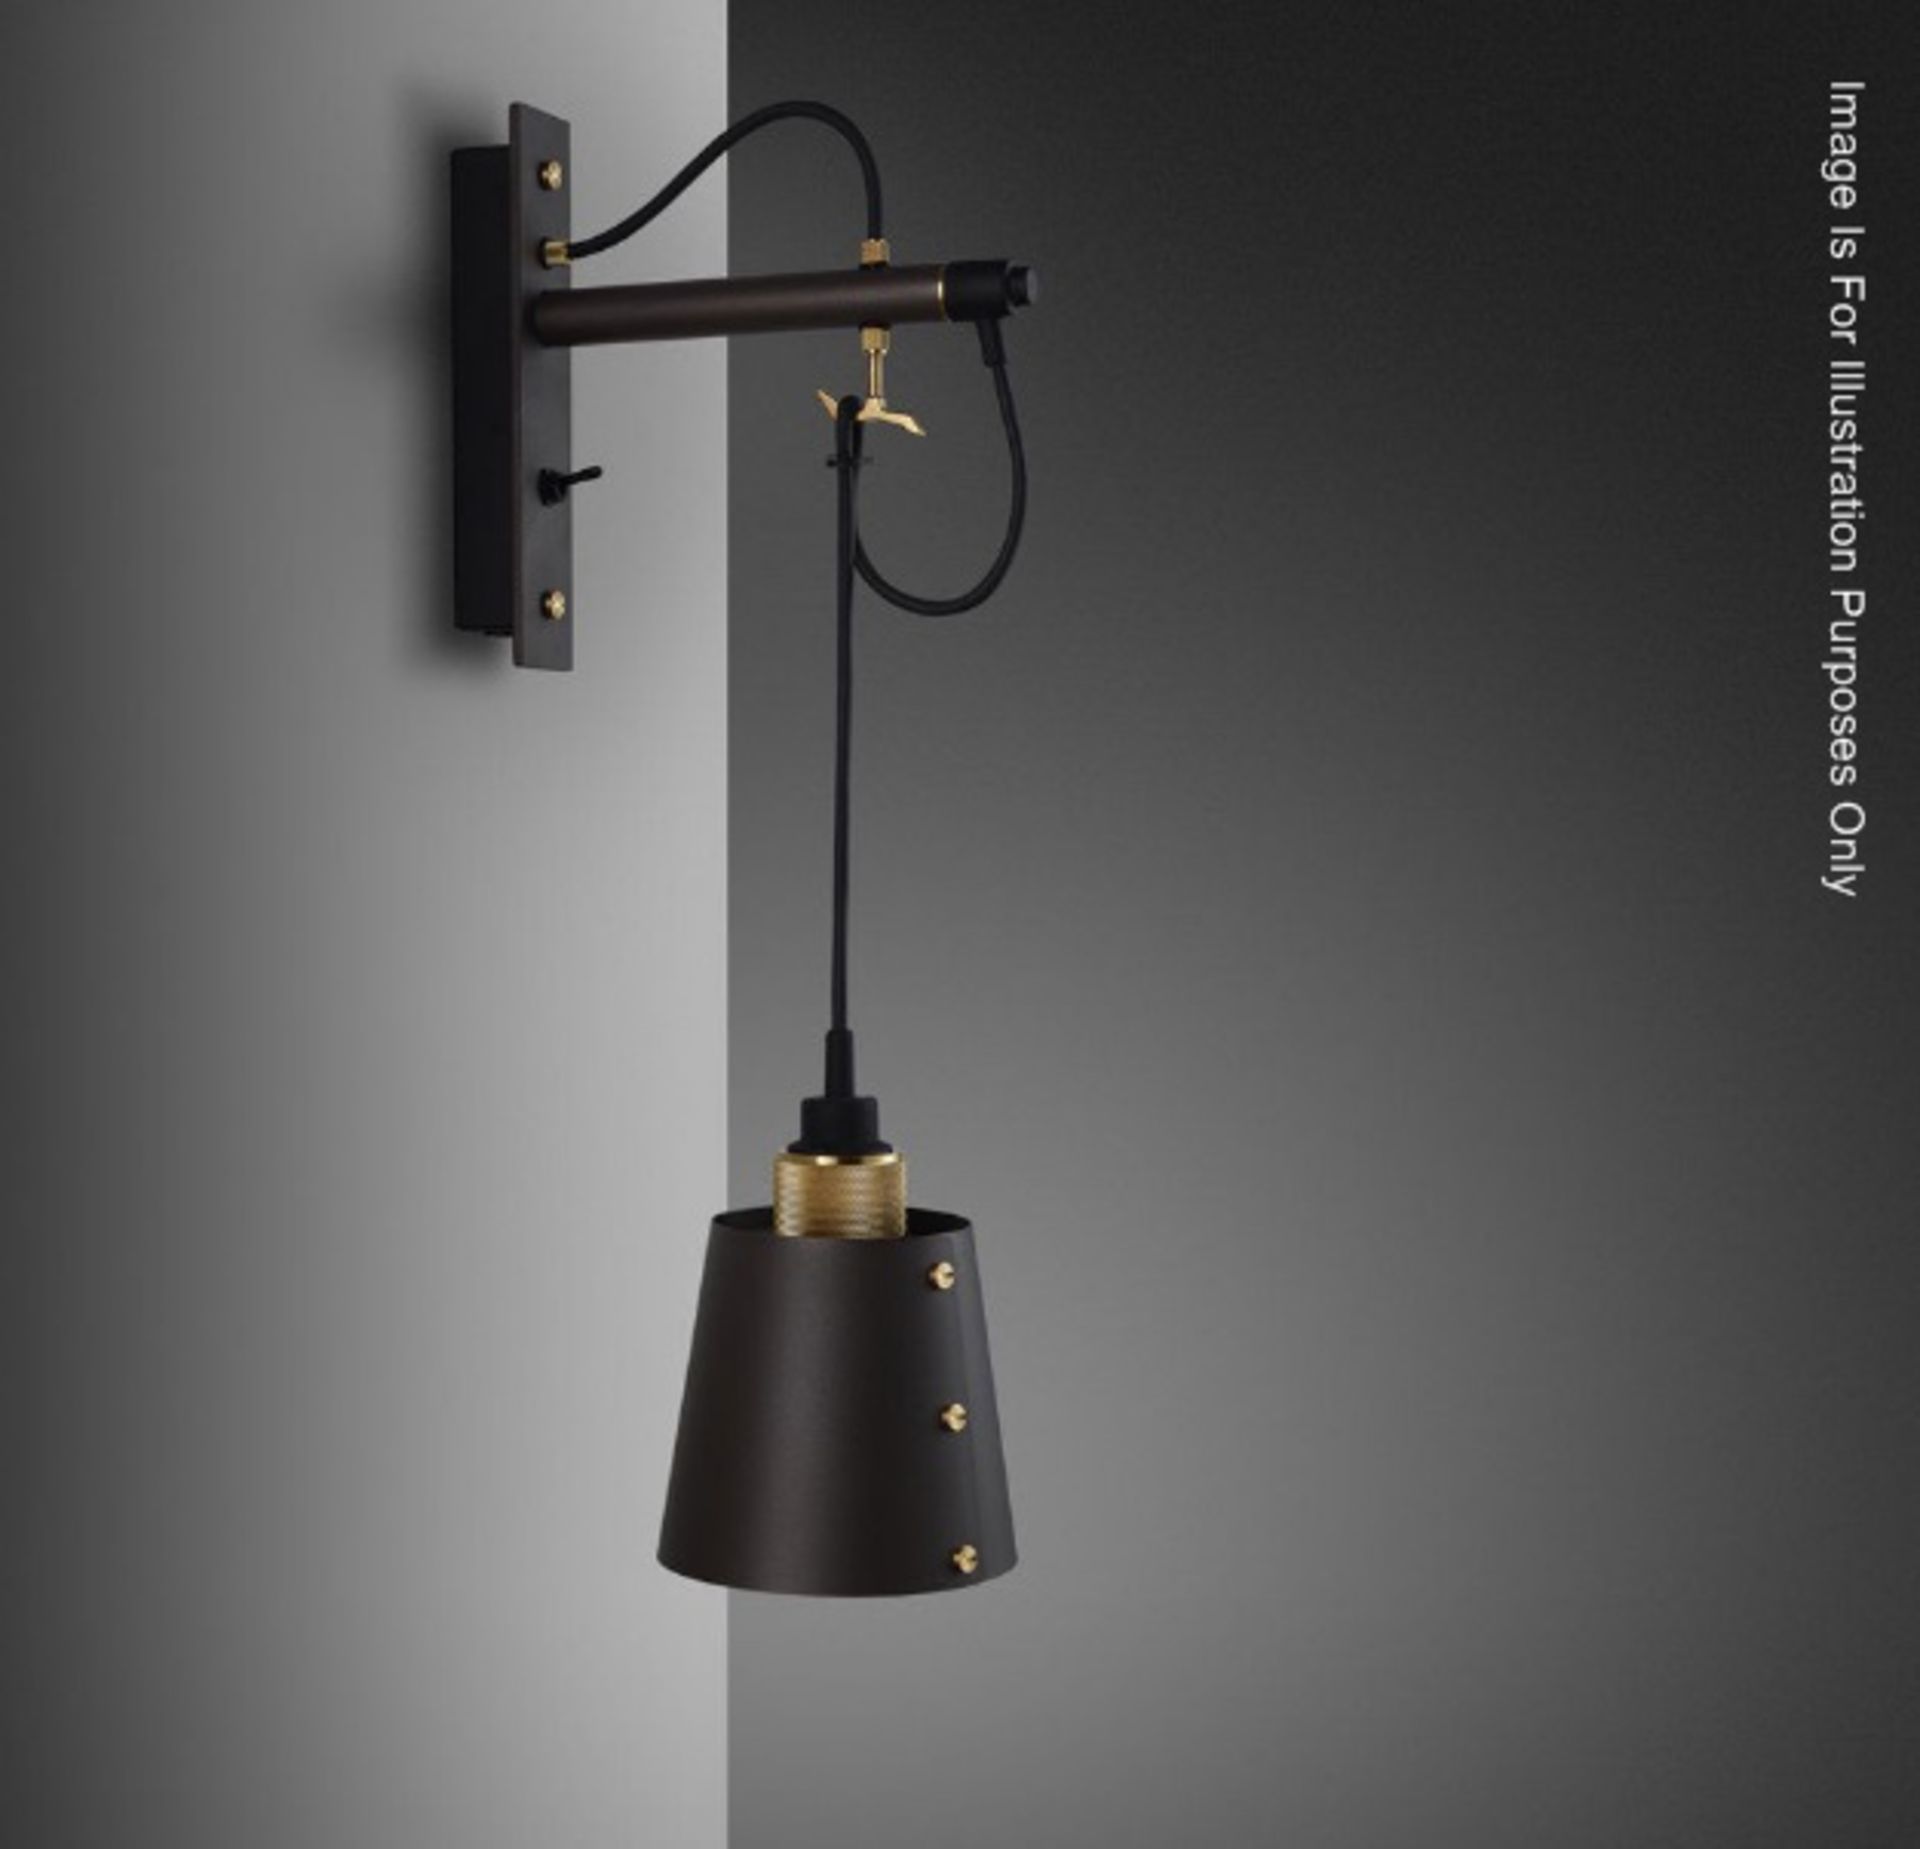 1 x BUSTER + PUNCH Hooked Wall Light With Metal Shade - Ref: WS/FF160A - CL204 - Location: London Ci